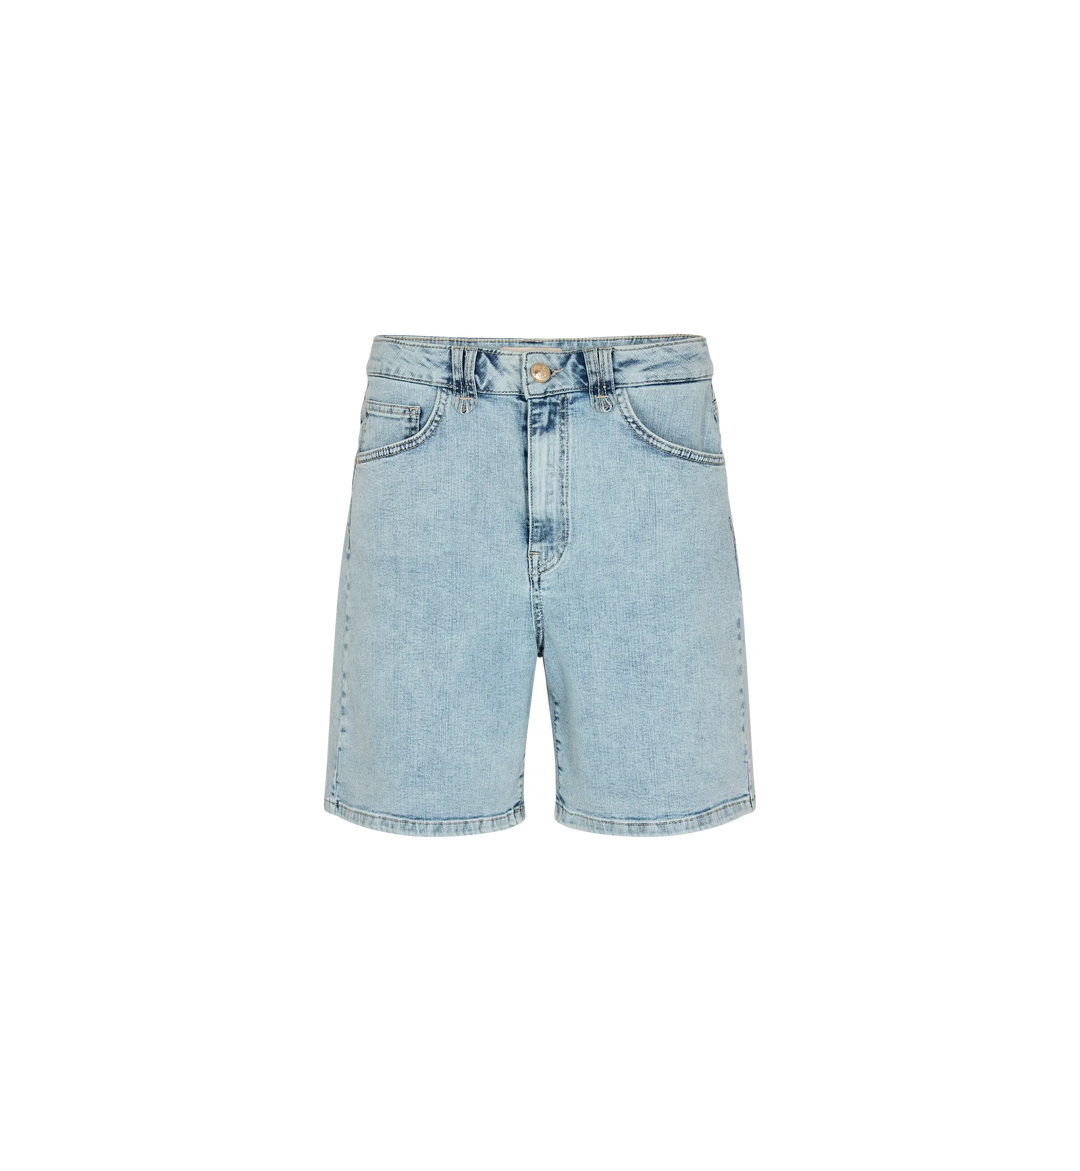 GAMA RE-LOVED SHORTS - MOS MOSH